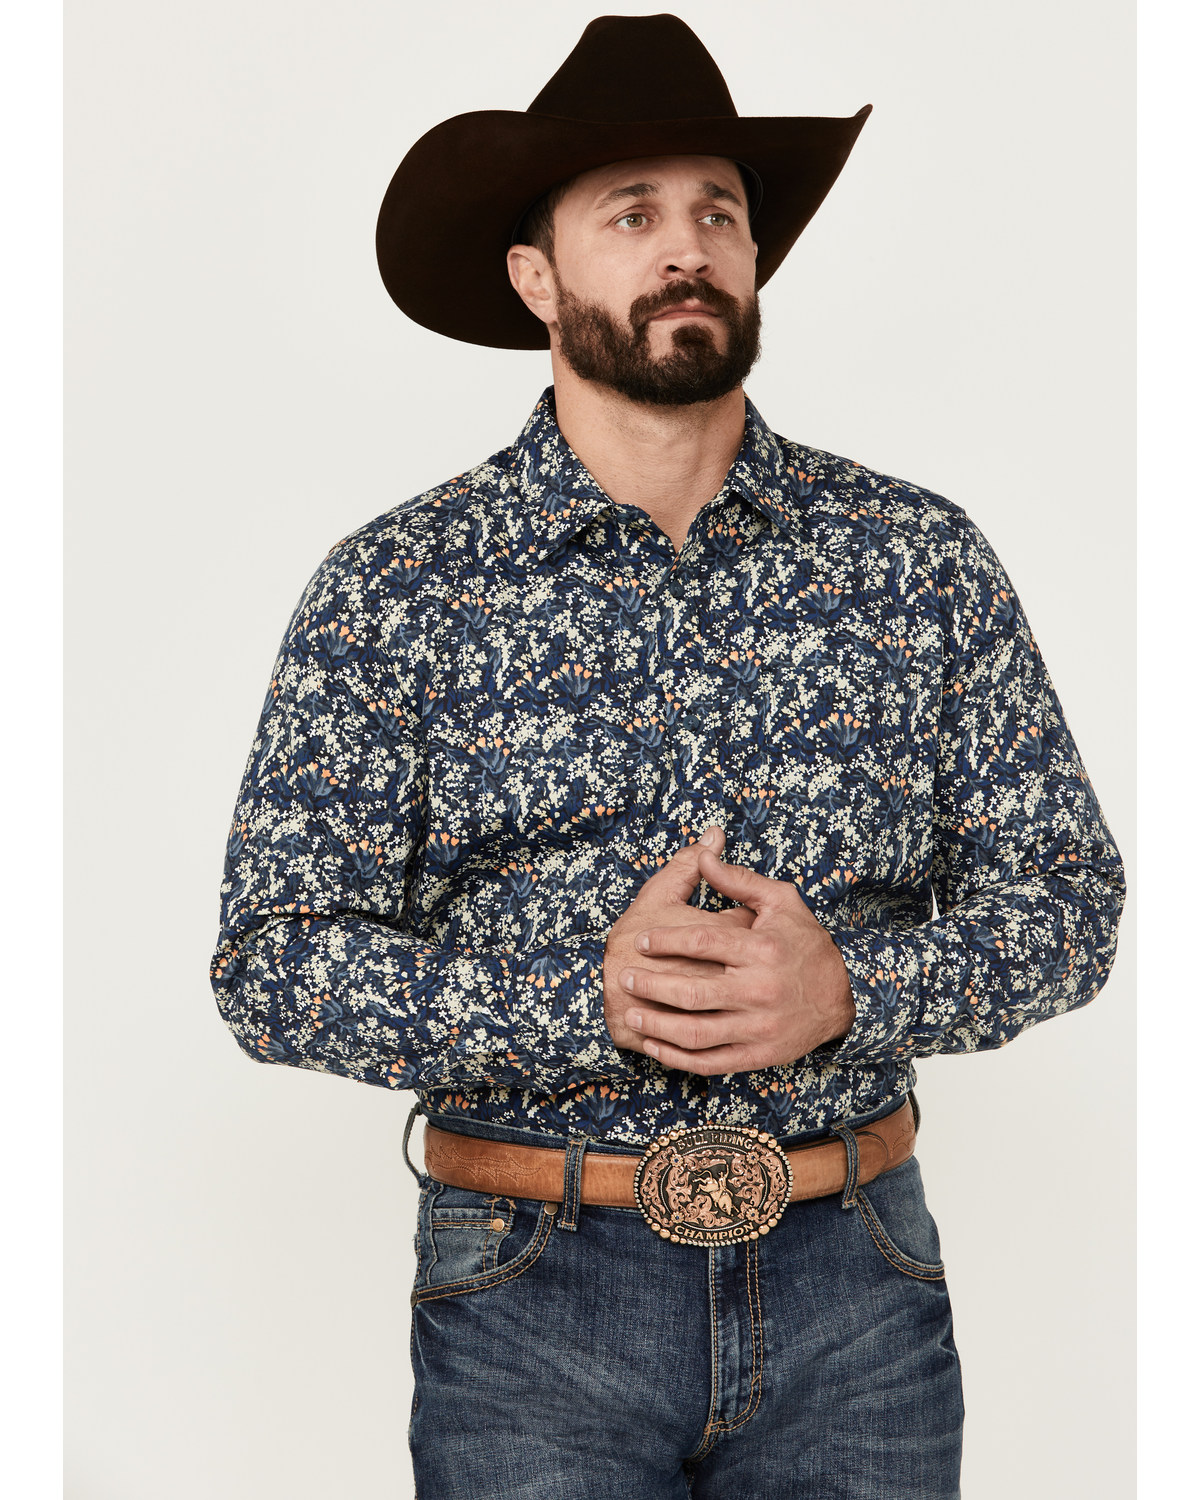 Gibson Trading Co Men's Shin Dig Floral Print Long Sleeve Button-Down Western Shirt